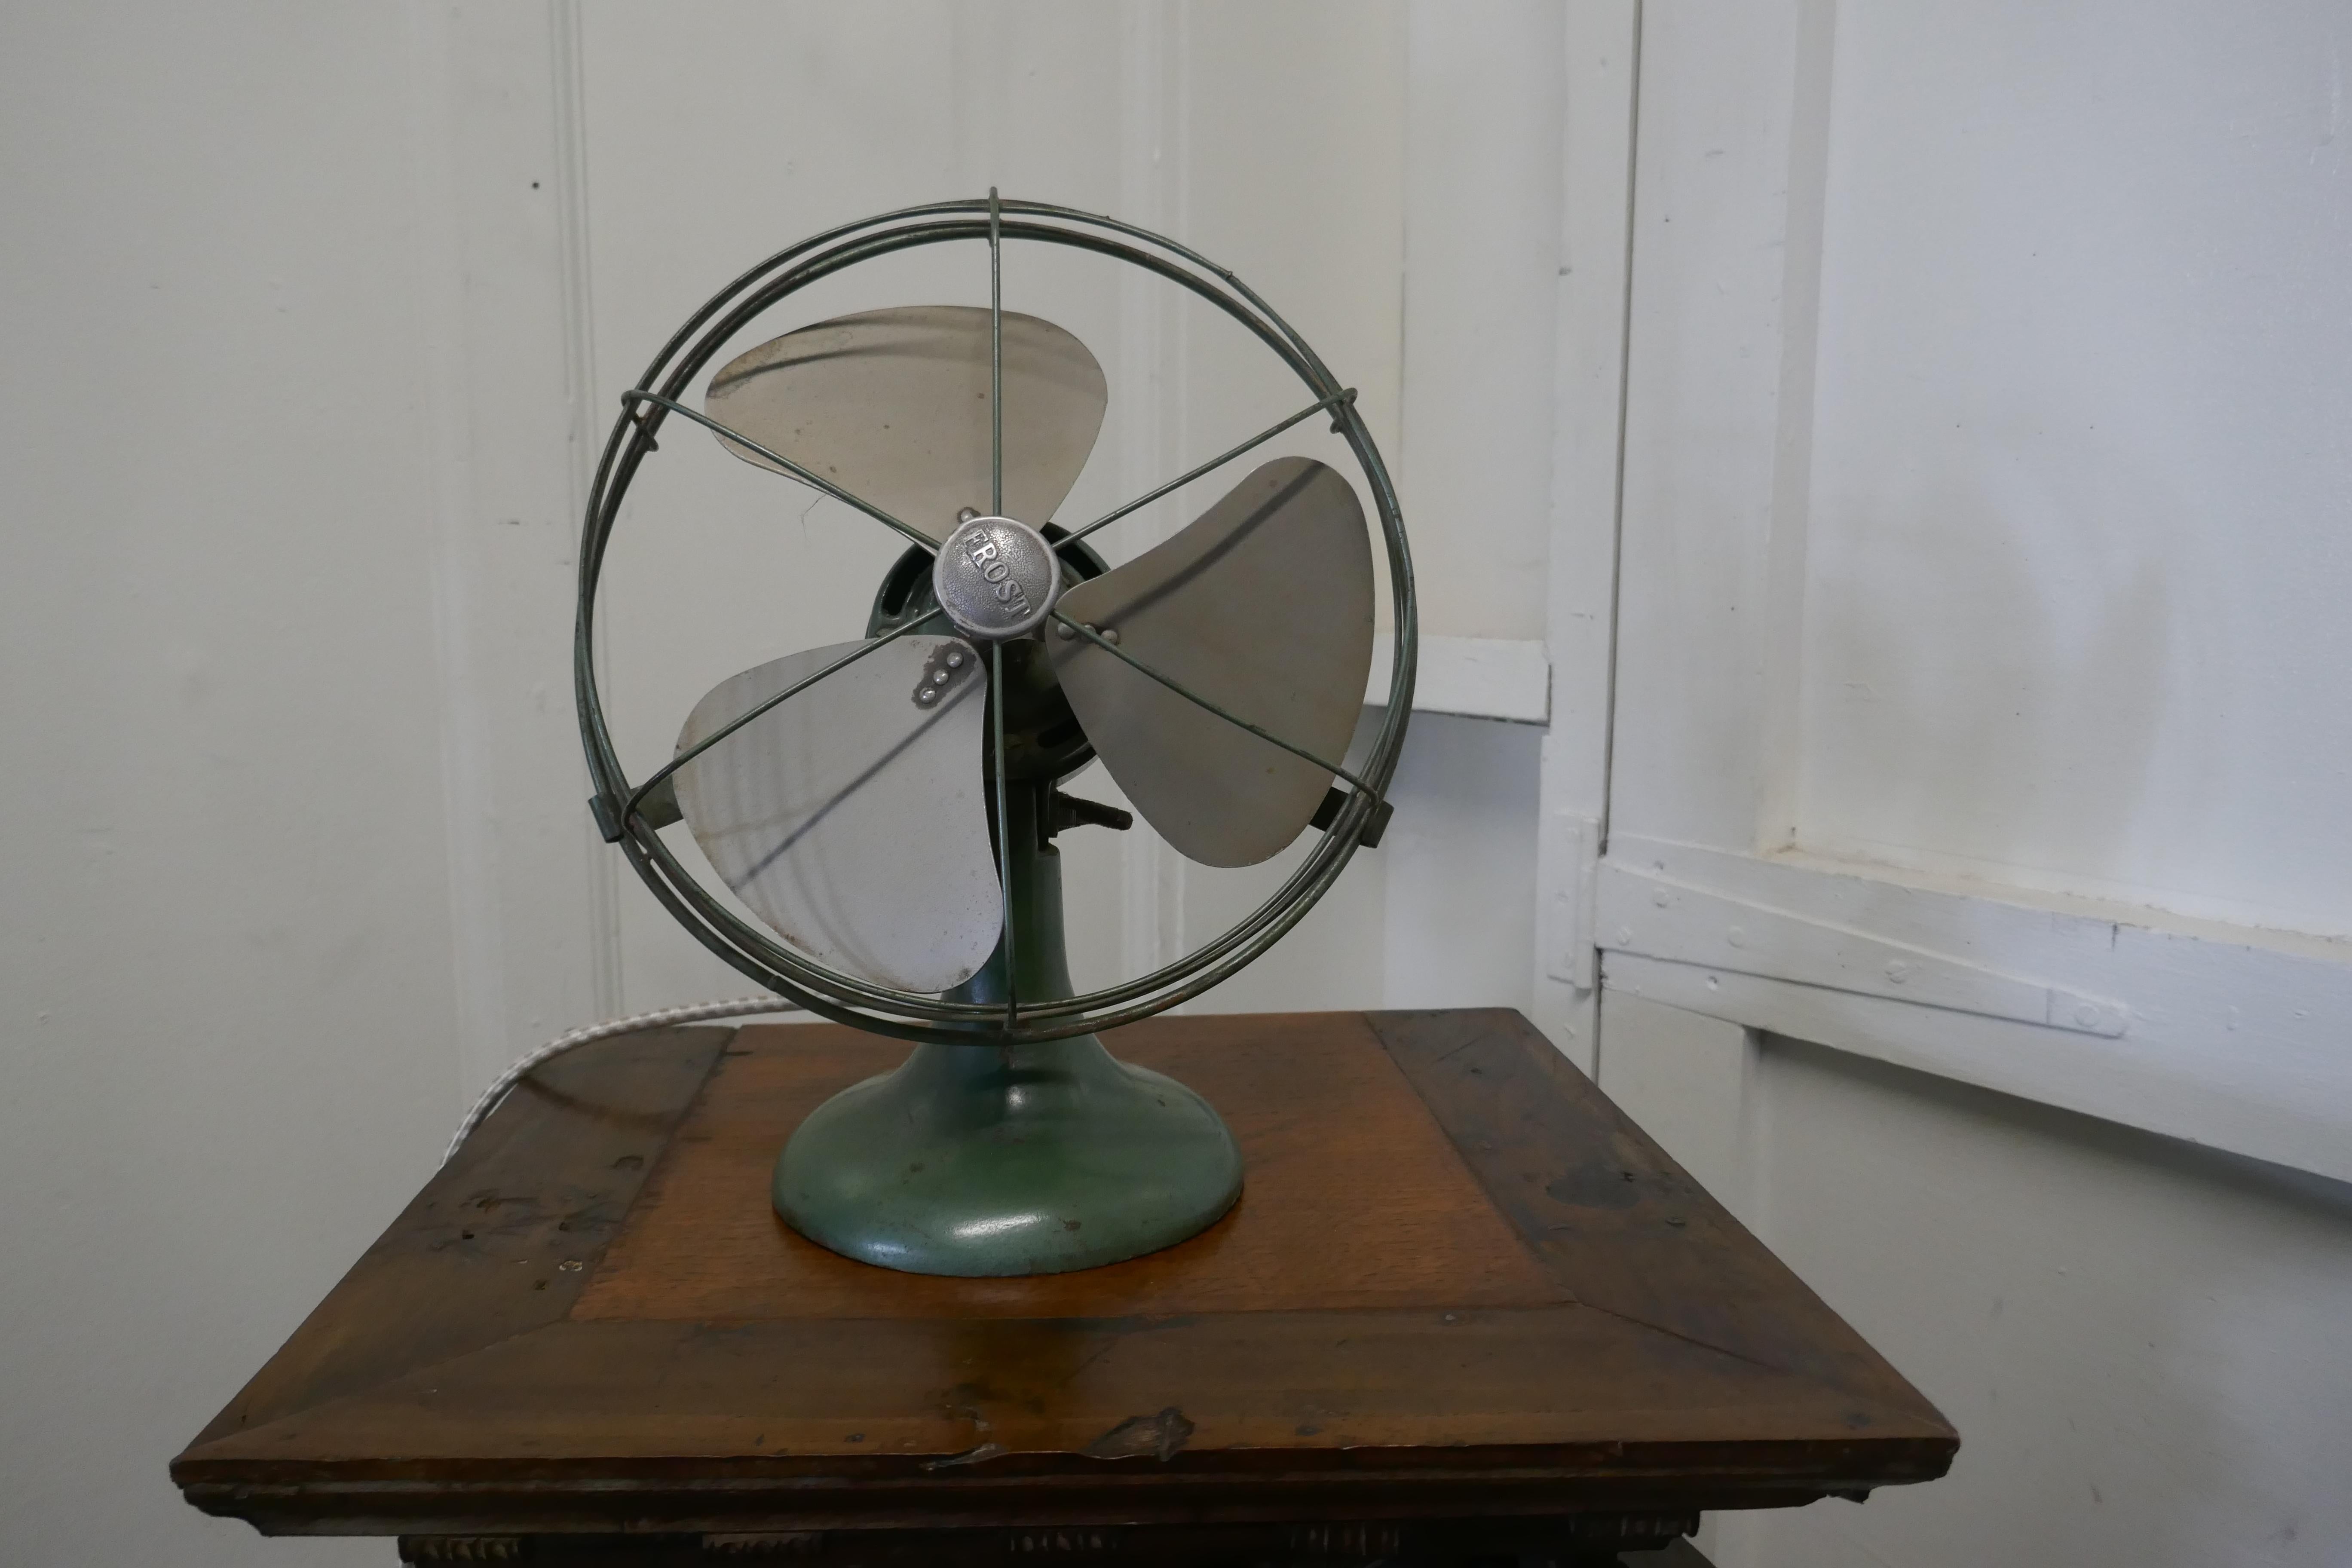 Early 20th century brass electric fan, by Frost & Co

A very stylish good looking piece, with aluminium blades and metal cage 

This piece looks to be in good condition, the motor responds immediately and it runs well when connected to the